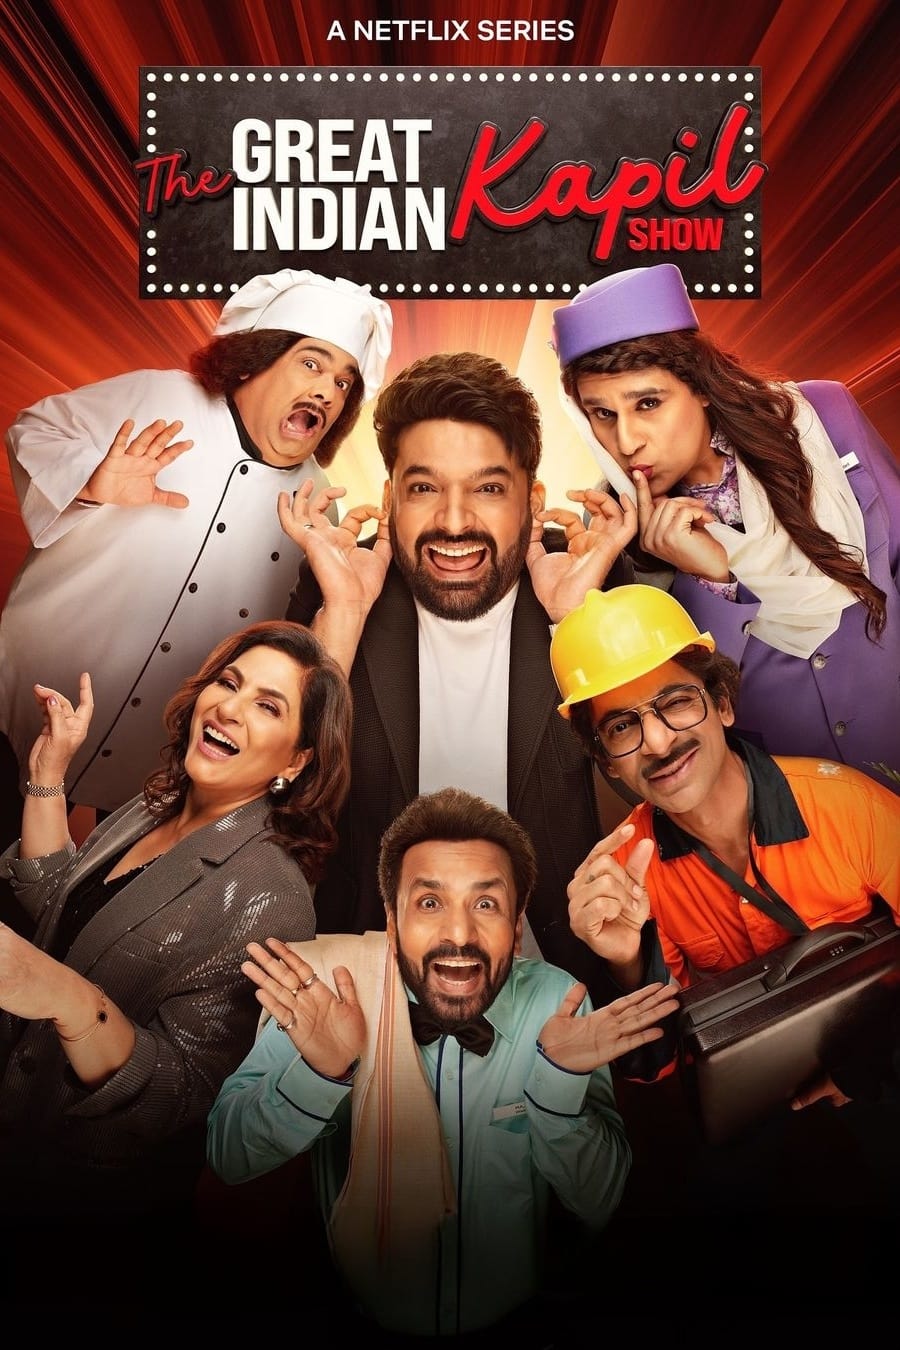 The Great Indian Kapil Show (Season 1) WEB-DL [Hindi DD5.1] 1080p 720p & 480p [x264] HD | [NF Series] [EP-2 Added]